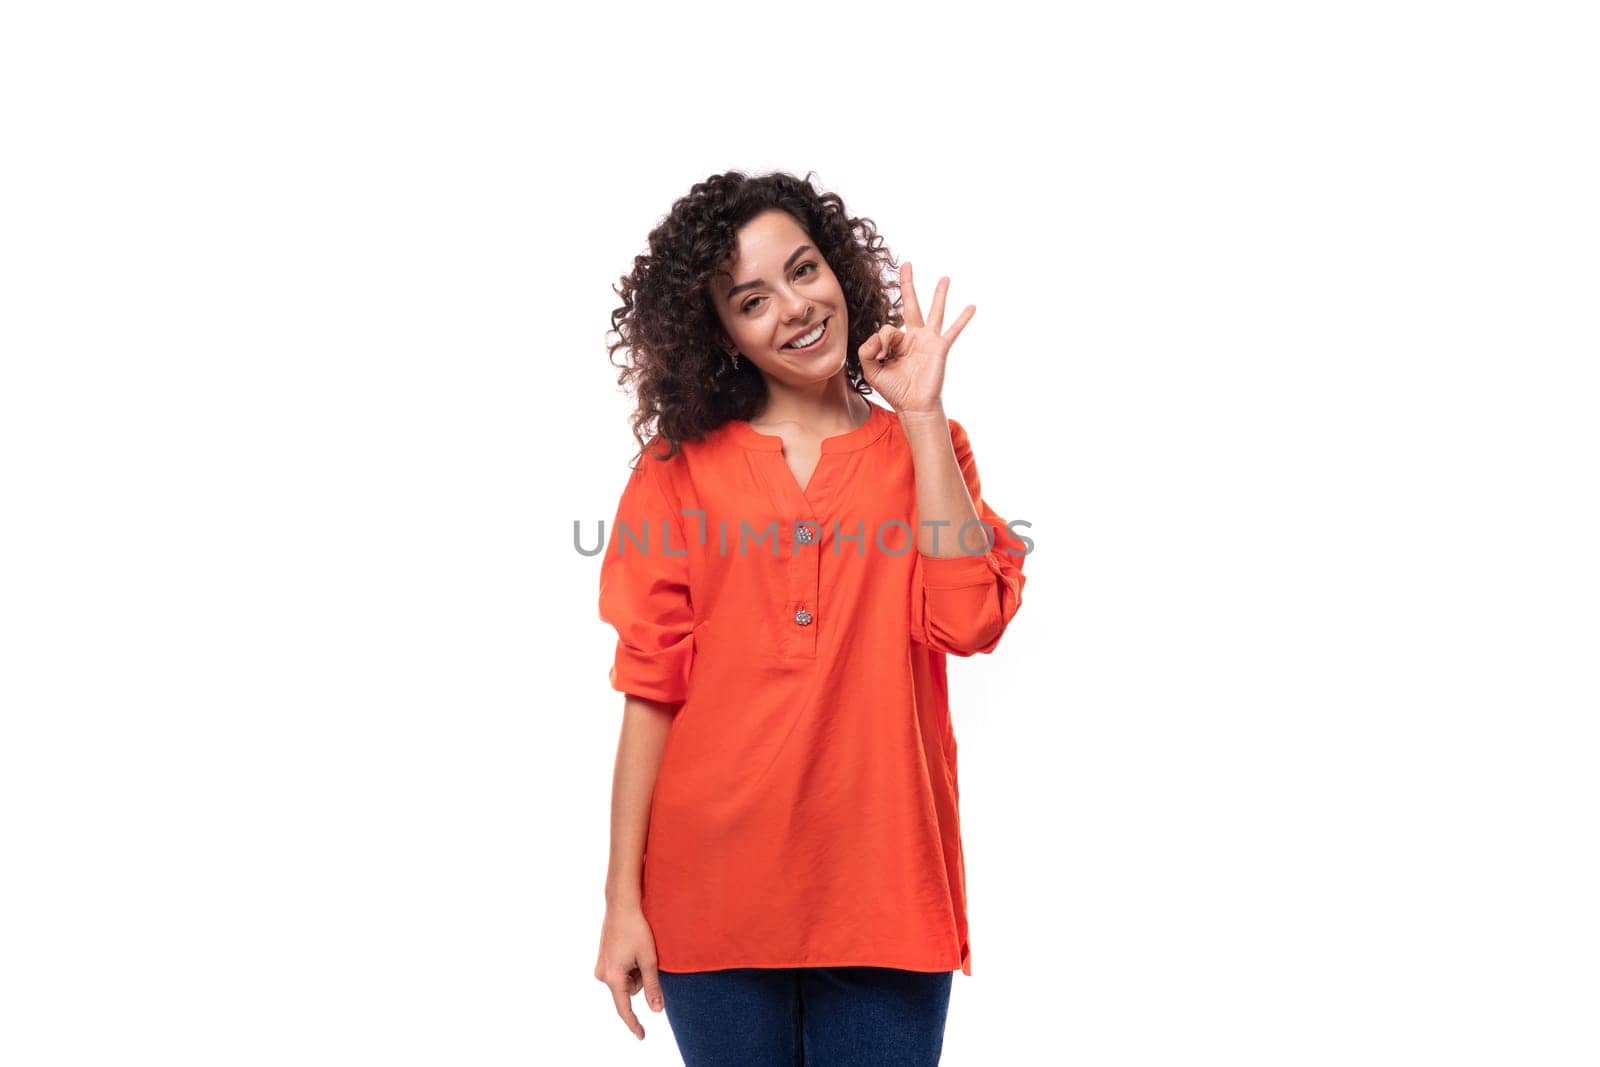 young european woman with curly black hair keeps dressed in a bright orange blouse works as an advertiser in the studio.